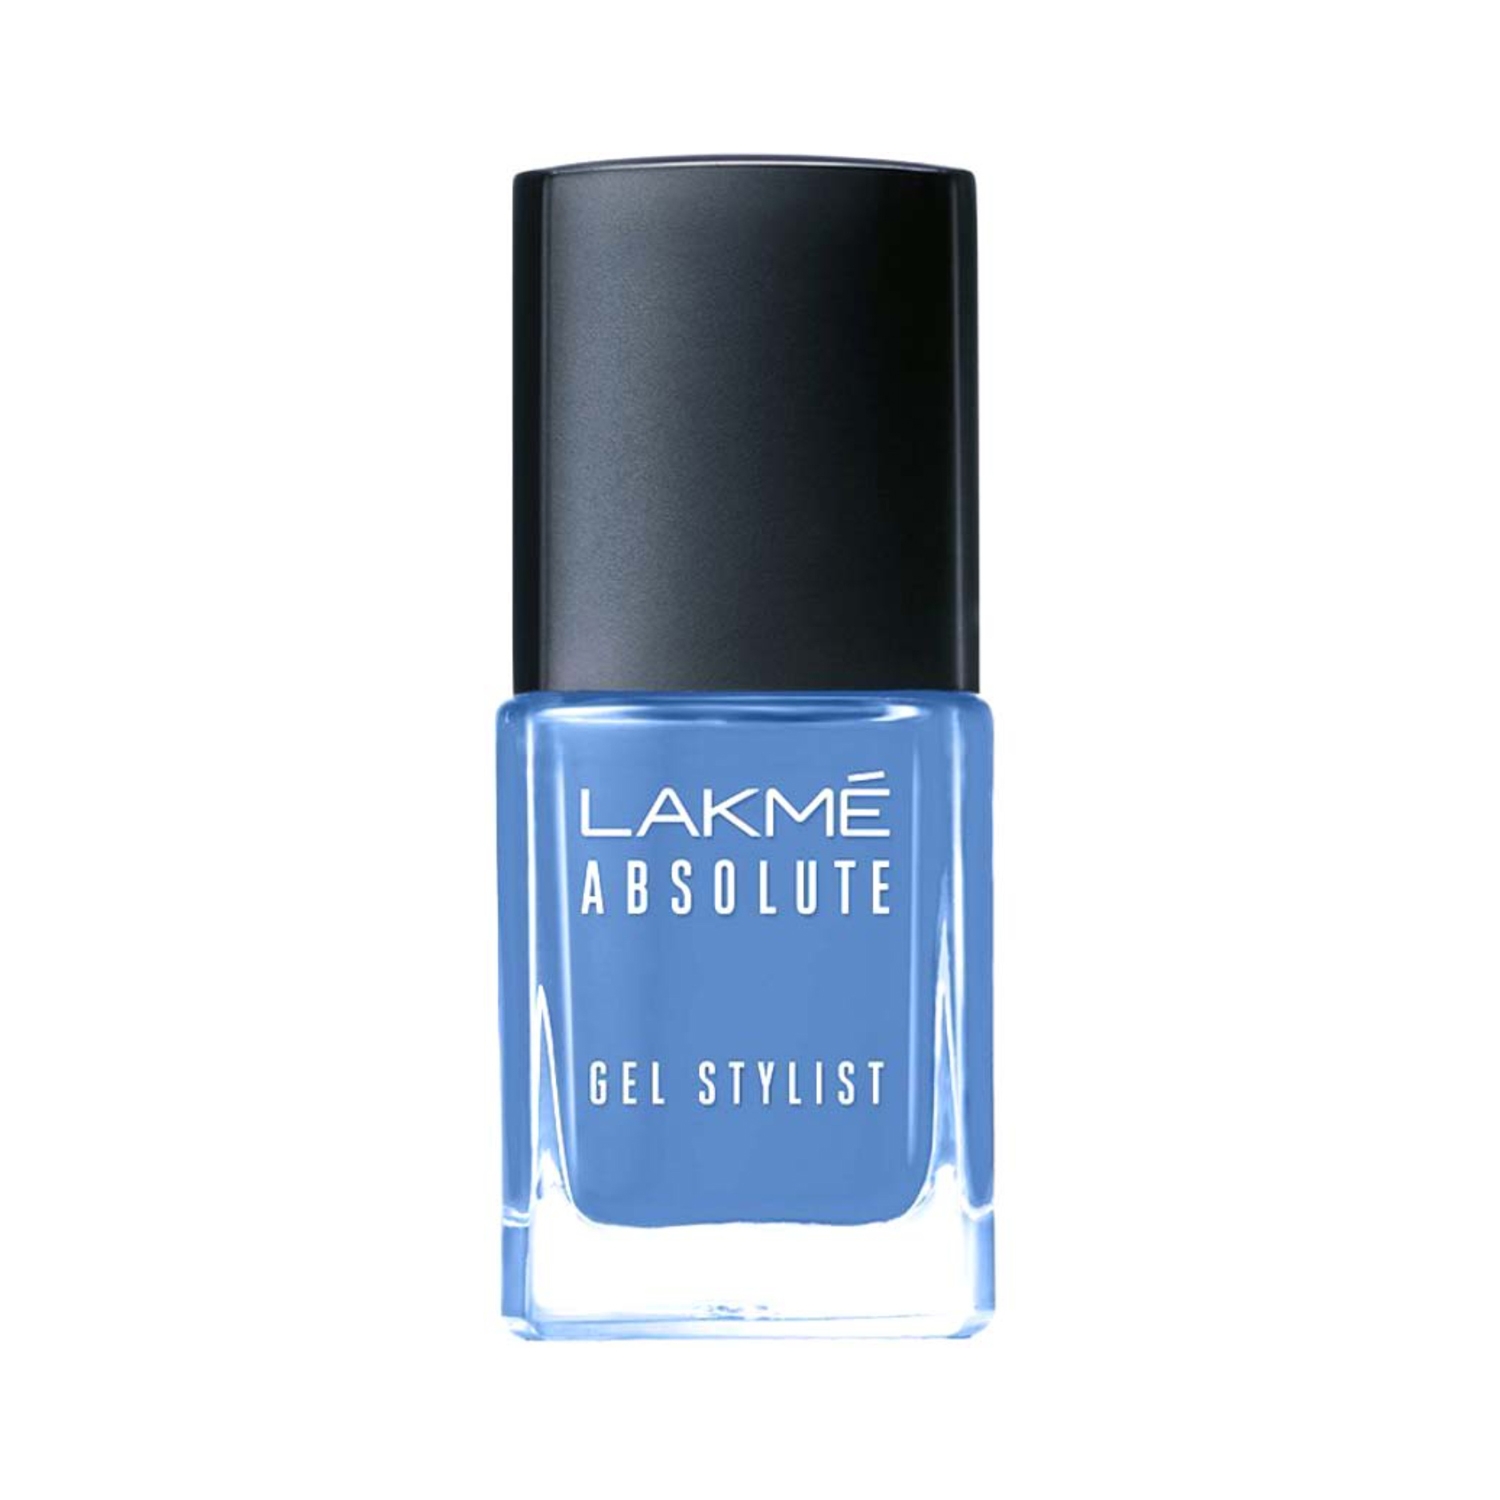 Lakme Absolute Gel Stylist Nail Color 12ml ( 48 Shades Available) | eBay